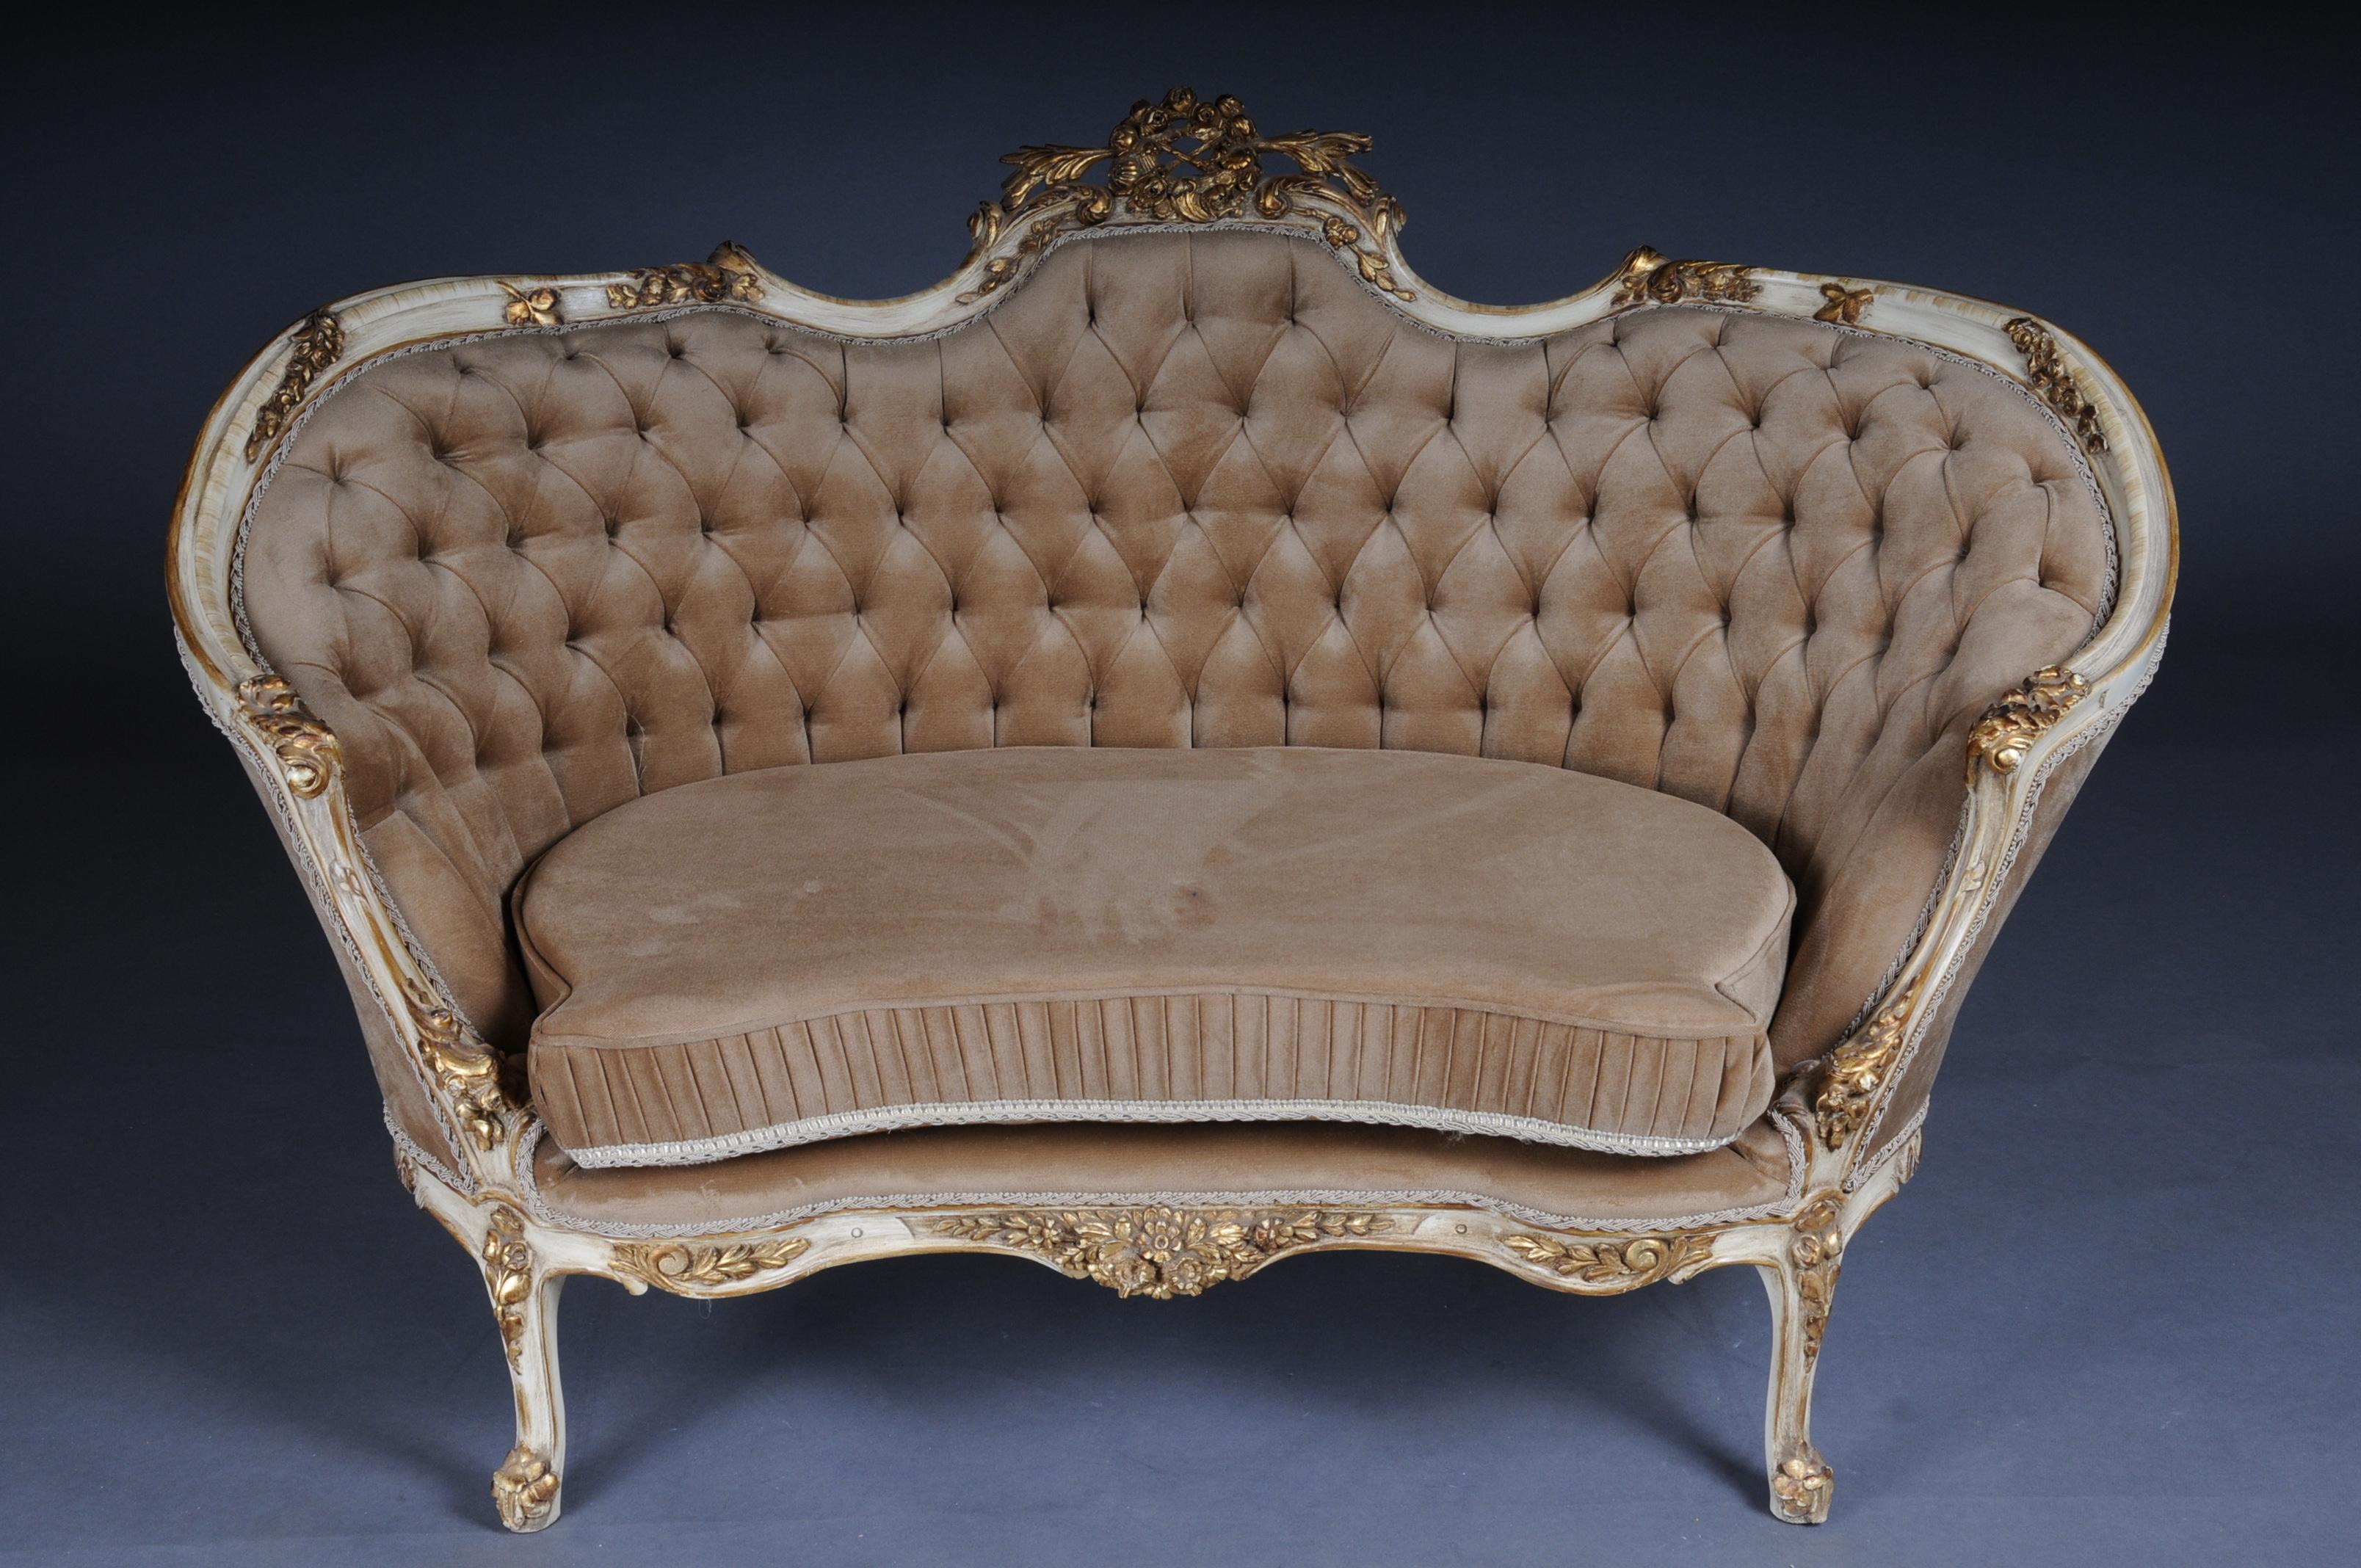 20th Century Elegant Sofa, Couch, Canapé in Rococo or Louis XV Style For Sale